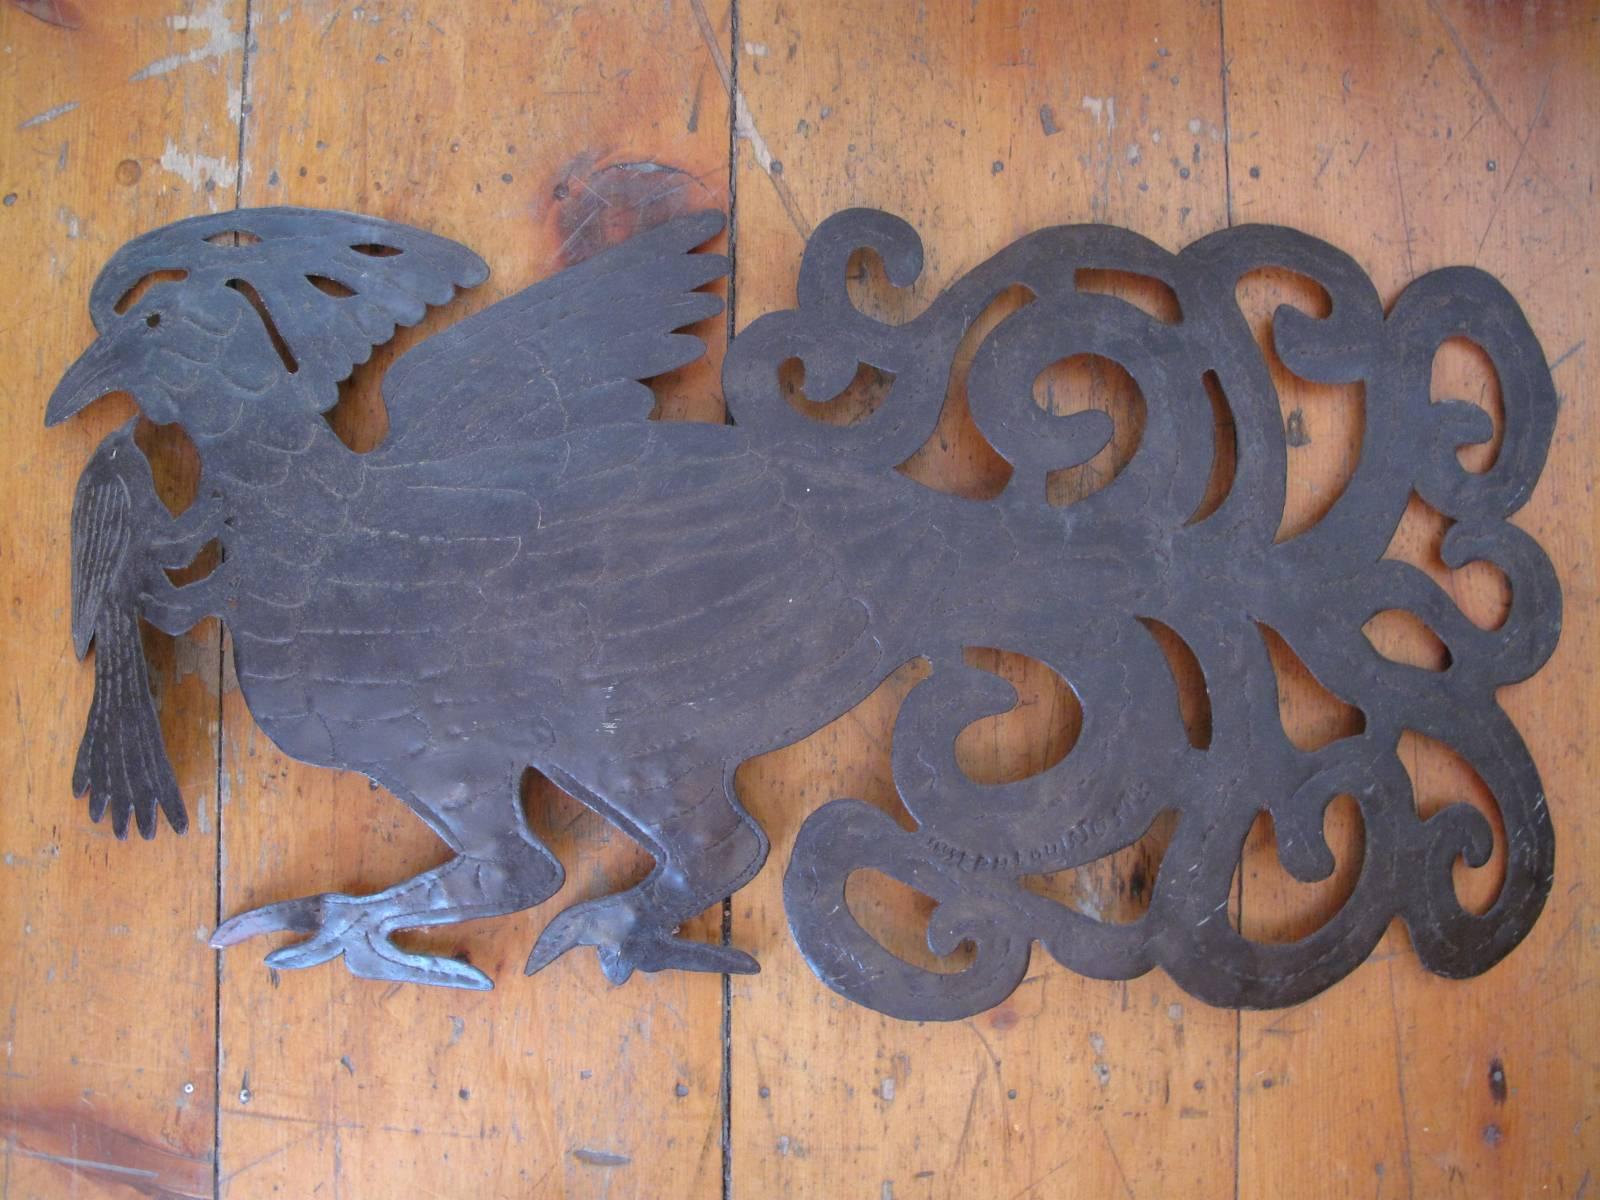 Large cut steel panel signed by Haitian self-taught artist Joseph Louis Juste.